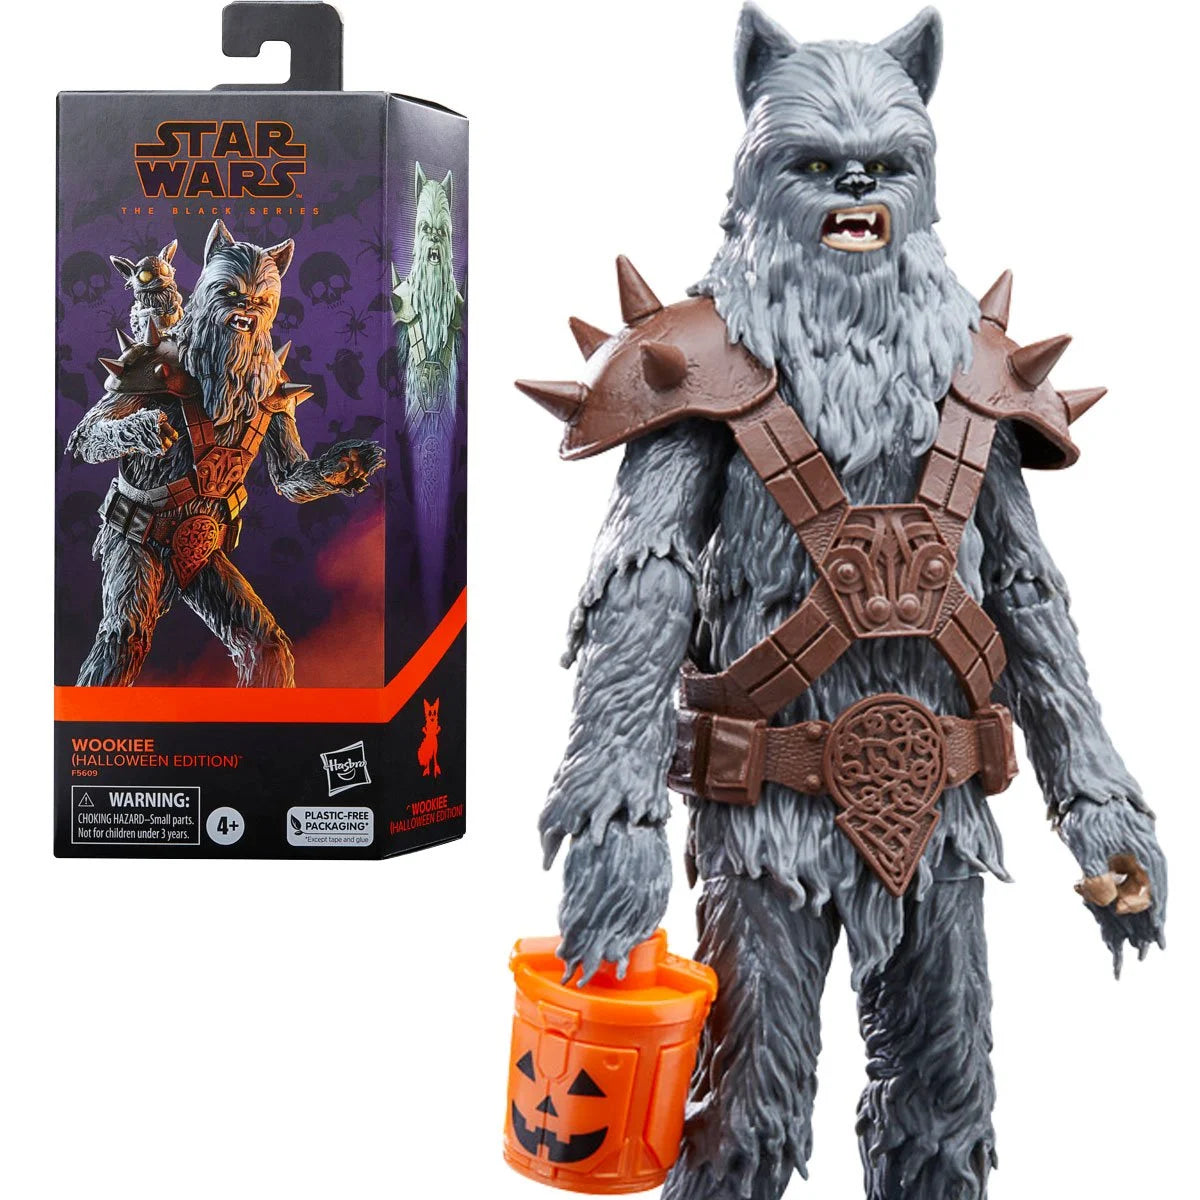 Wookiee Star Wars The Black Series (Halloween Edition) and Bogling 6-Inch Action Figure - Exclusive